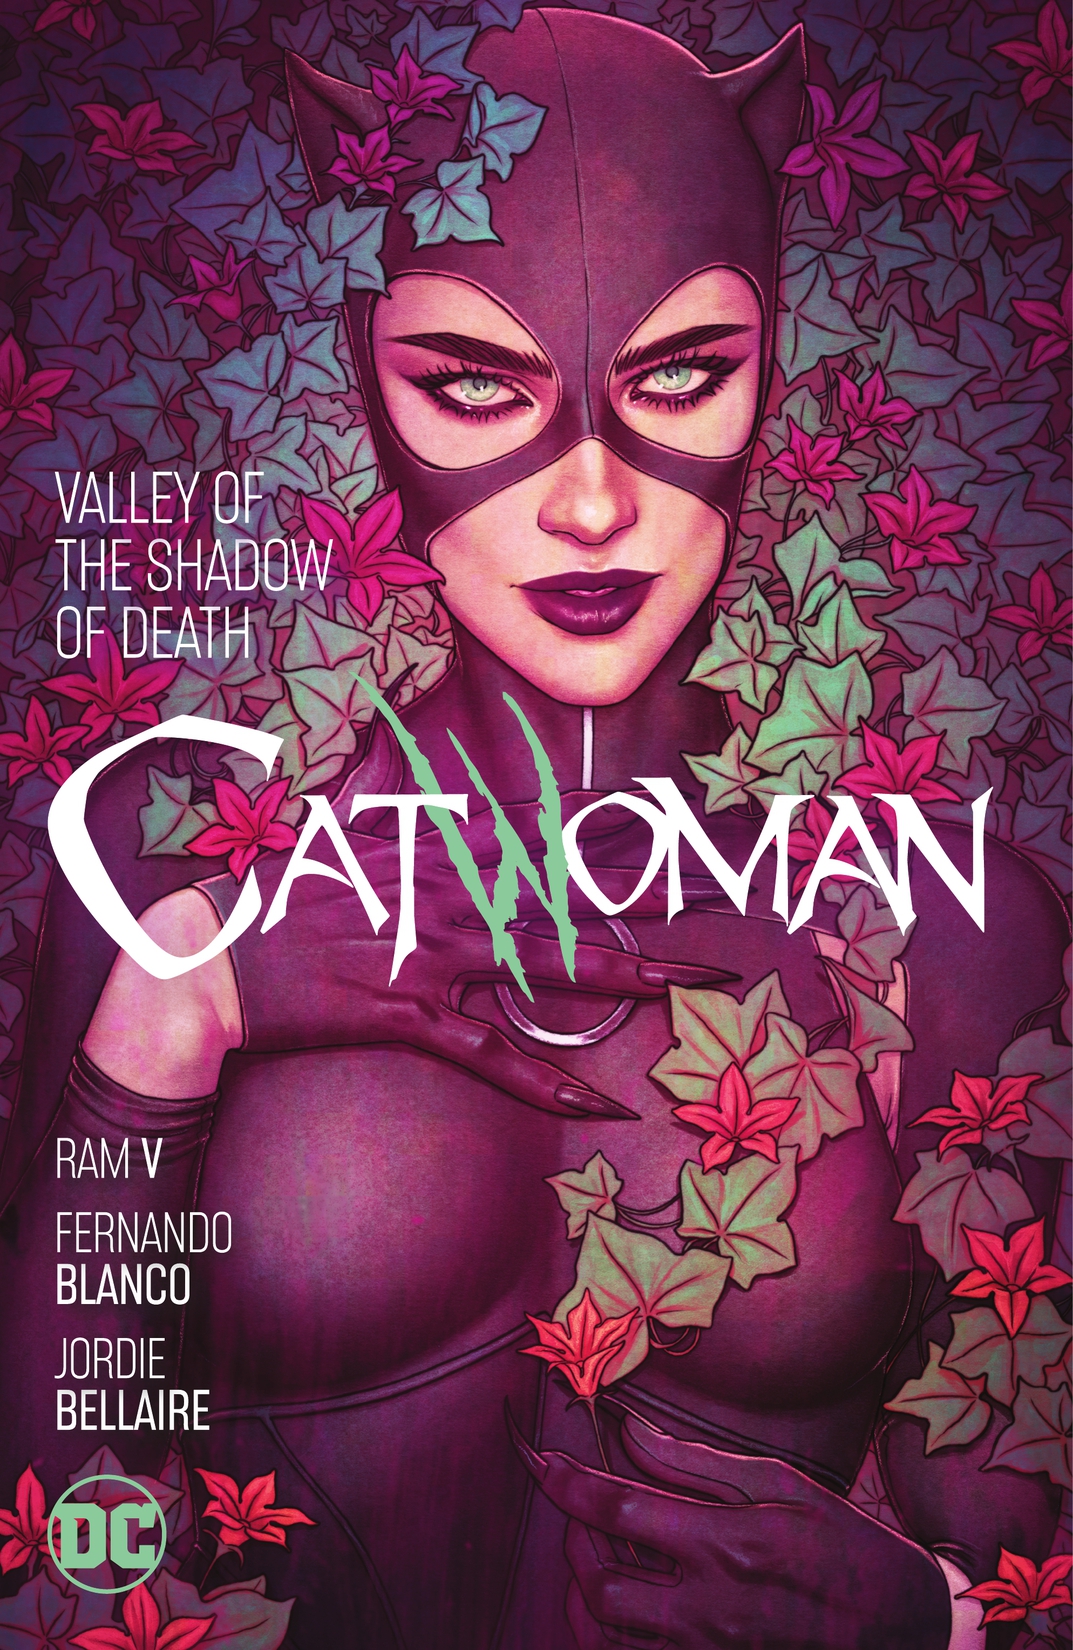 Catwoman Vol. 5: Valley of the Shadow of Death preview images